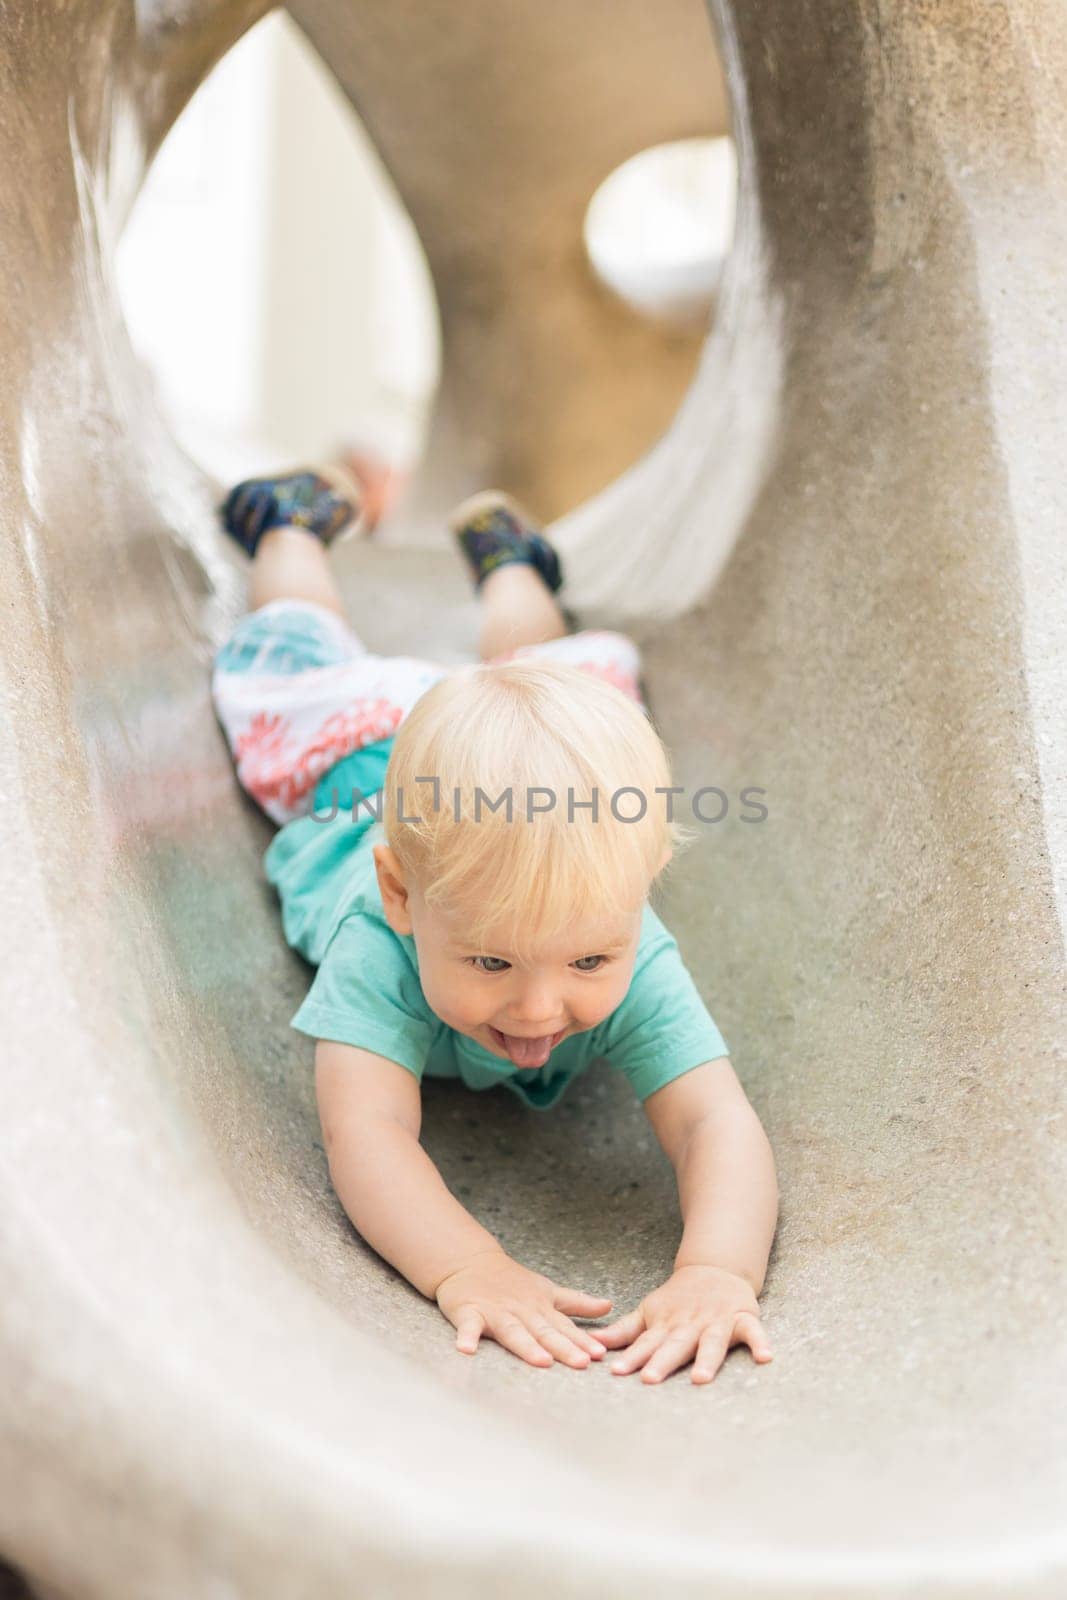 Child playing on outdoor playground. Toddler plays on school or kindergarten yard. Active kid on stone sculpured slide. Healthy summer activity for children. Little boy climbing outdoors. by kasto